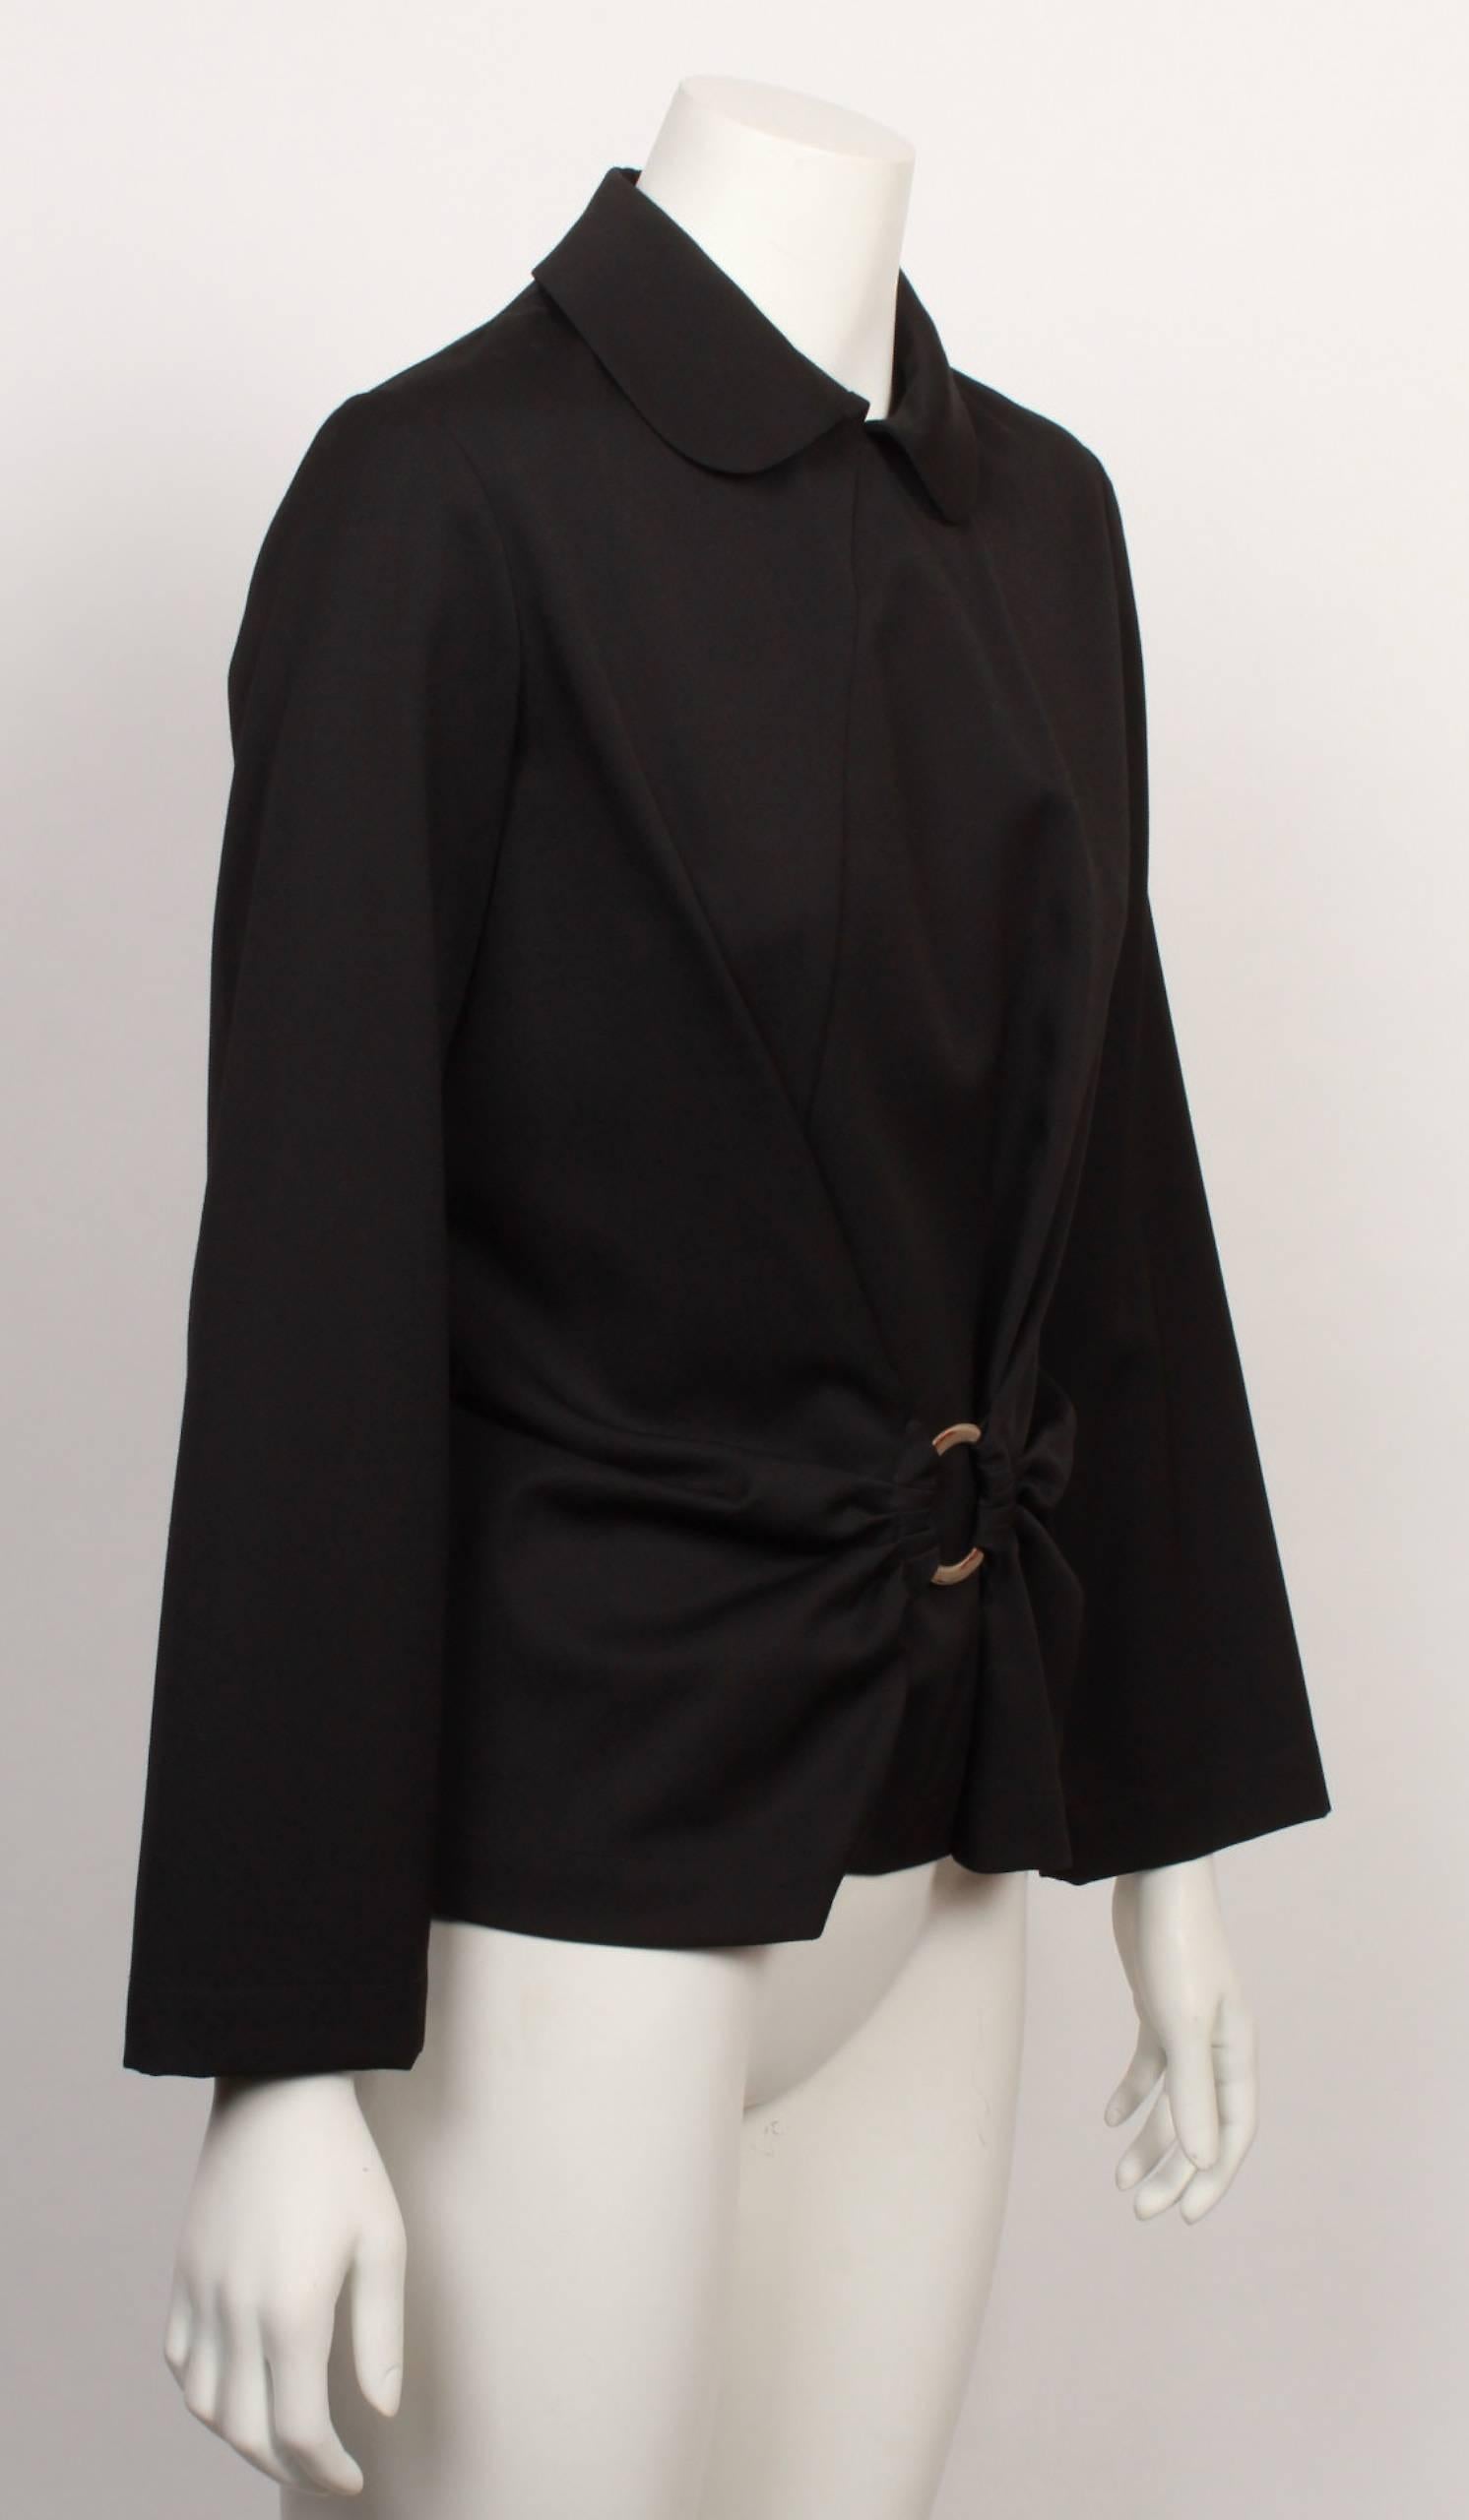 Junya Watanabe Comme Des Garcons black shell top with long sleeves, peter pan collar and curved front and back panel. Decorative nickel ring at the centre front with draped and gathered feature create a flattering silhouette by nipping in the waist.